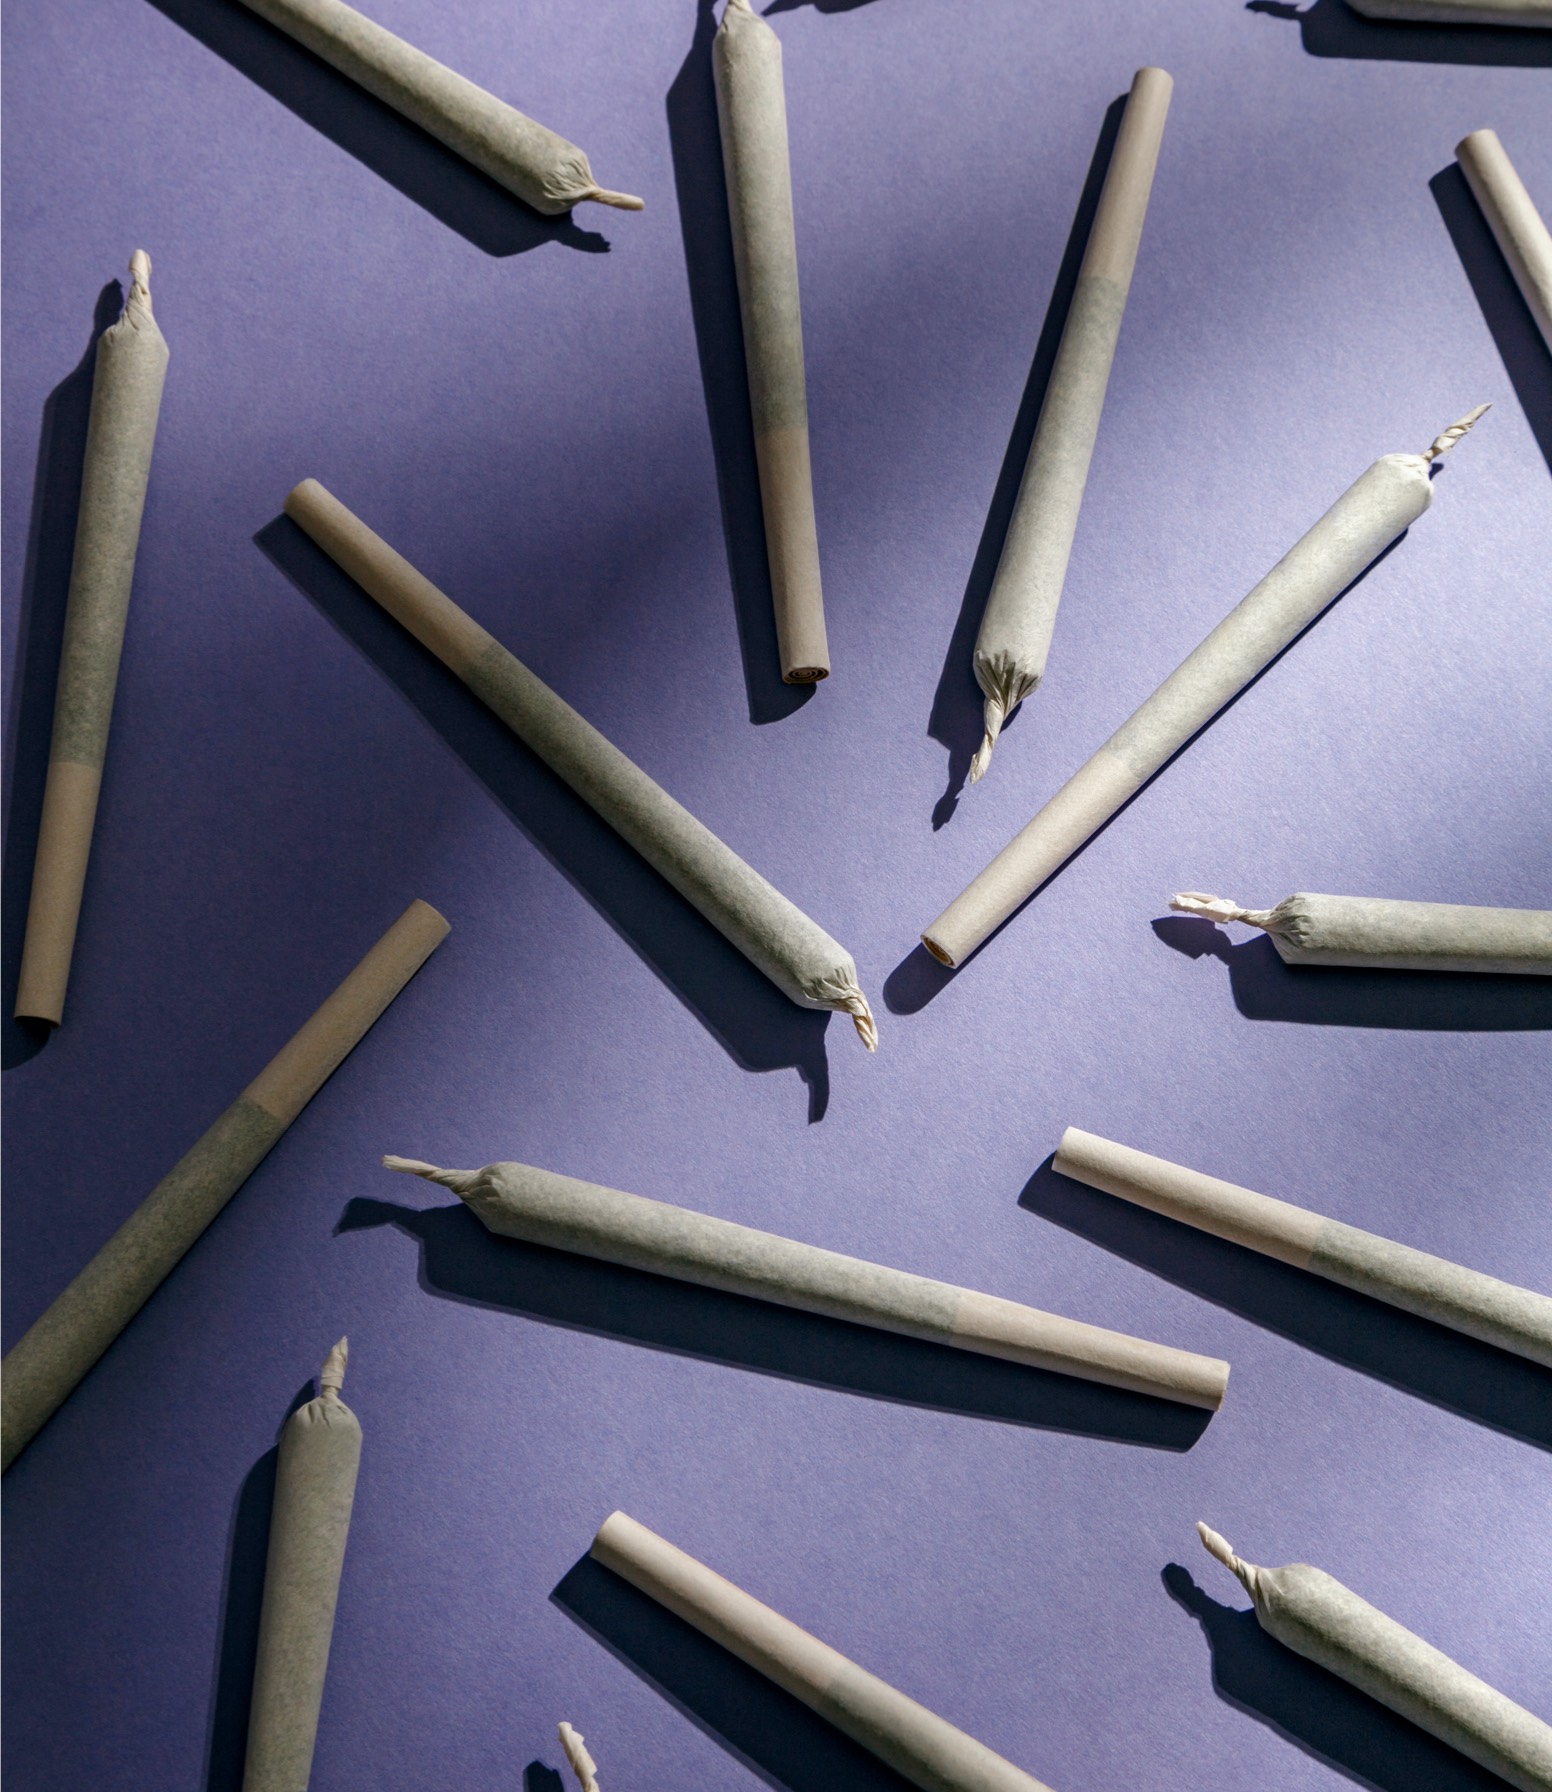 different weed joint types